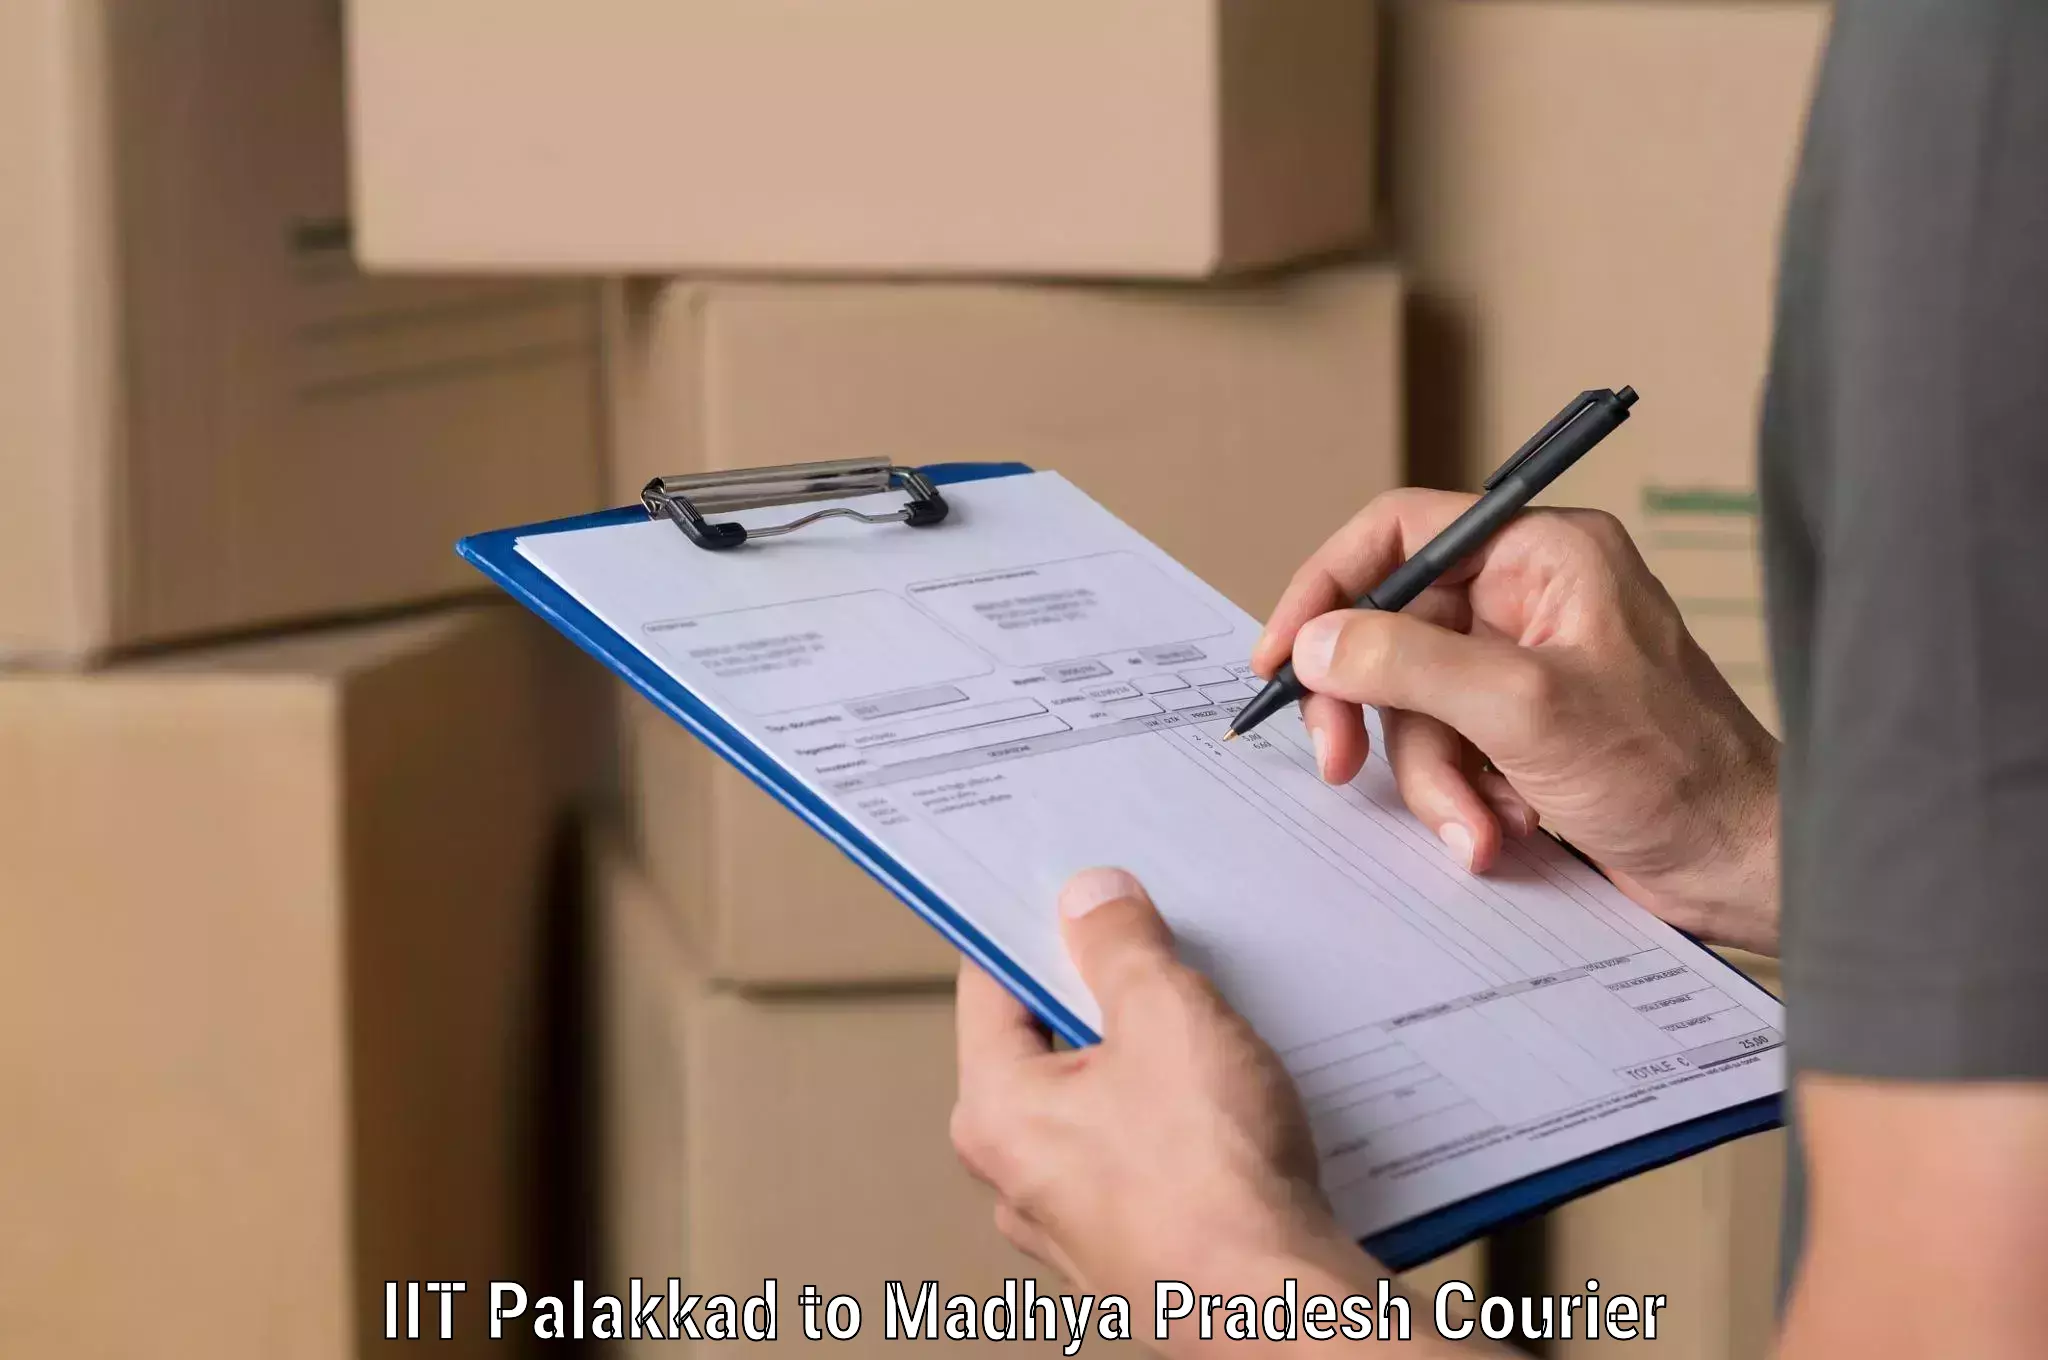 Sustainable delivery practices in IIT Palakkad to Udaipura